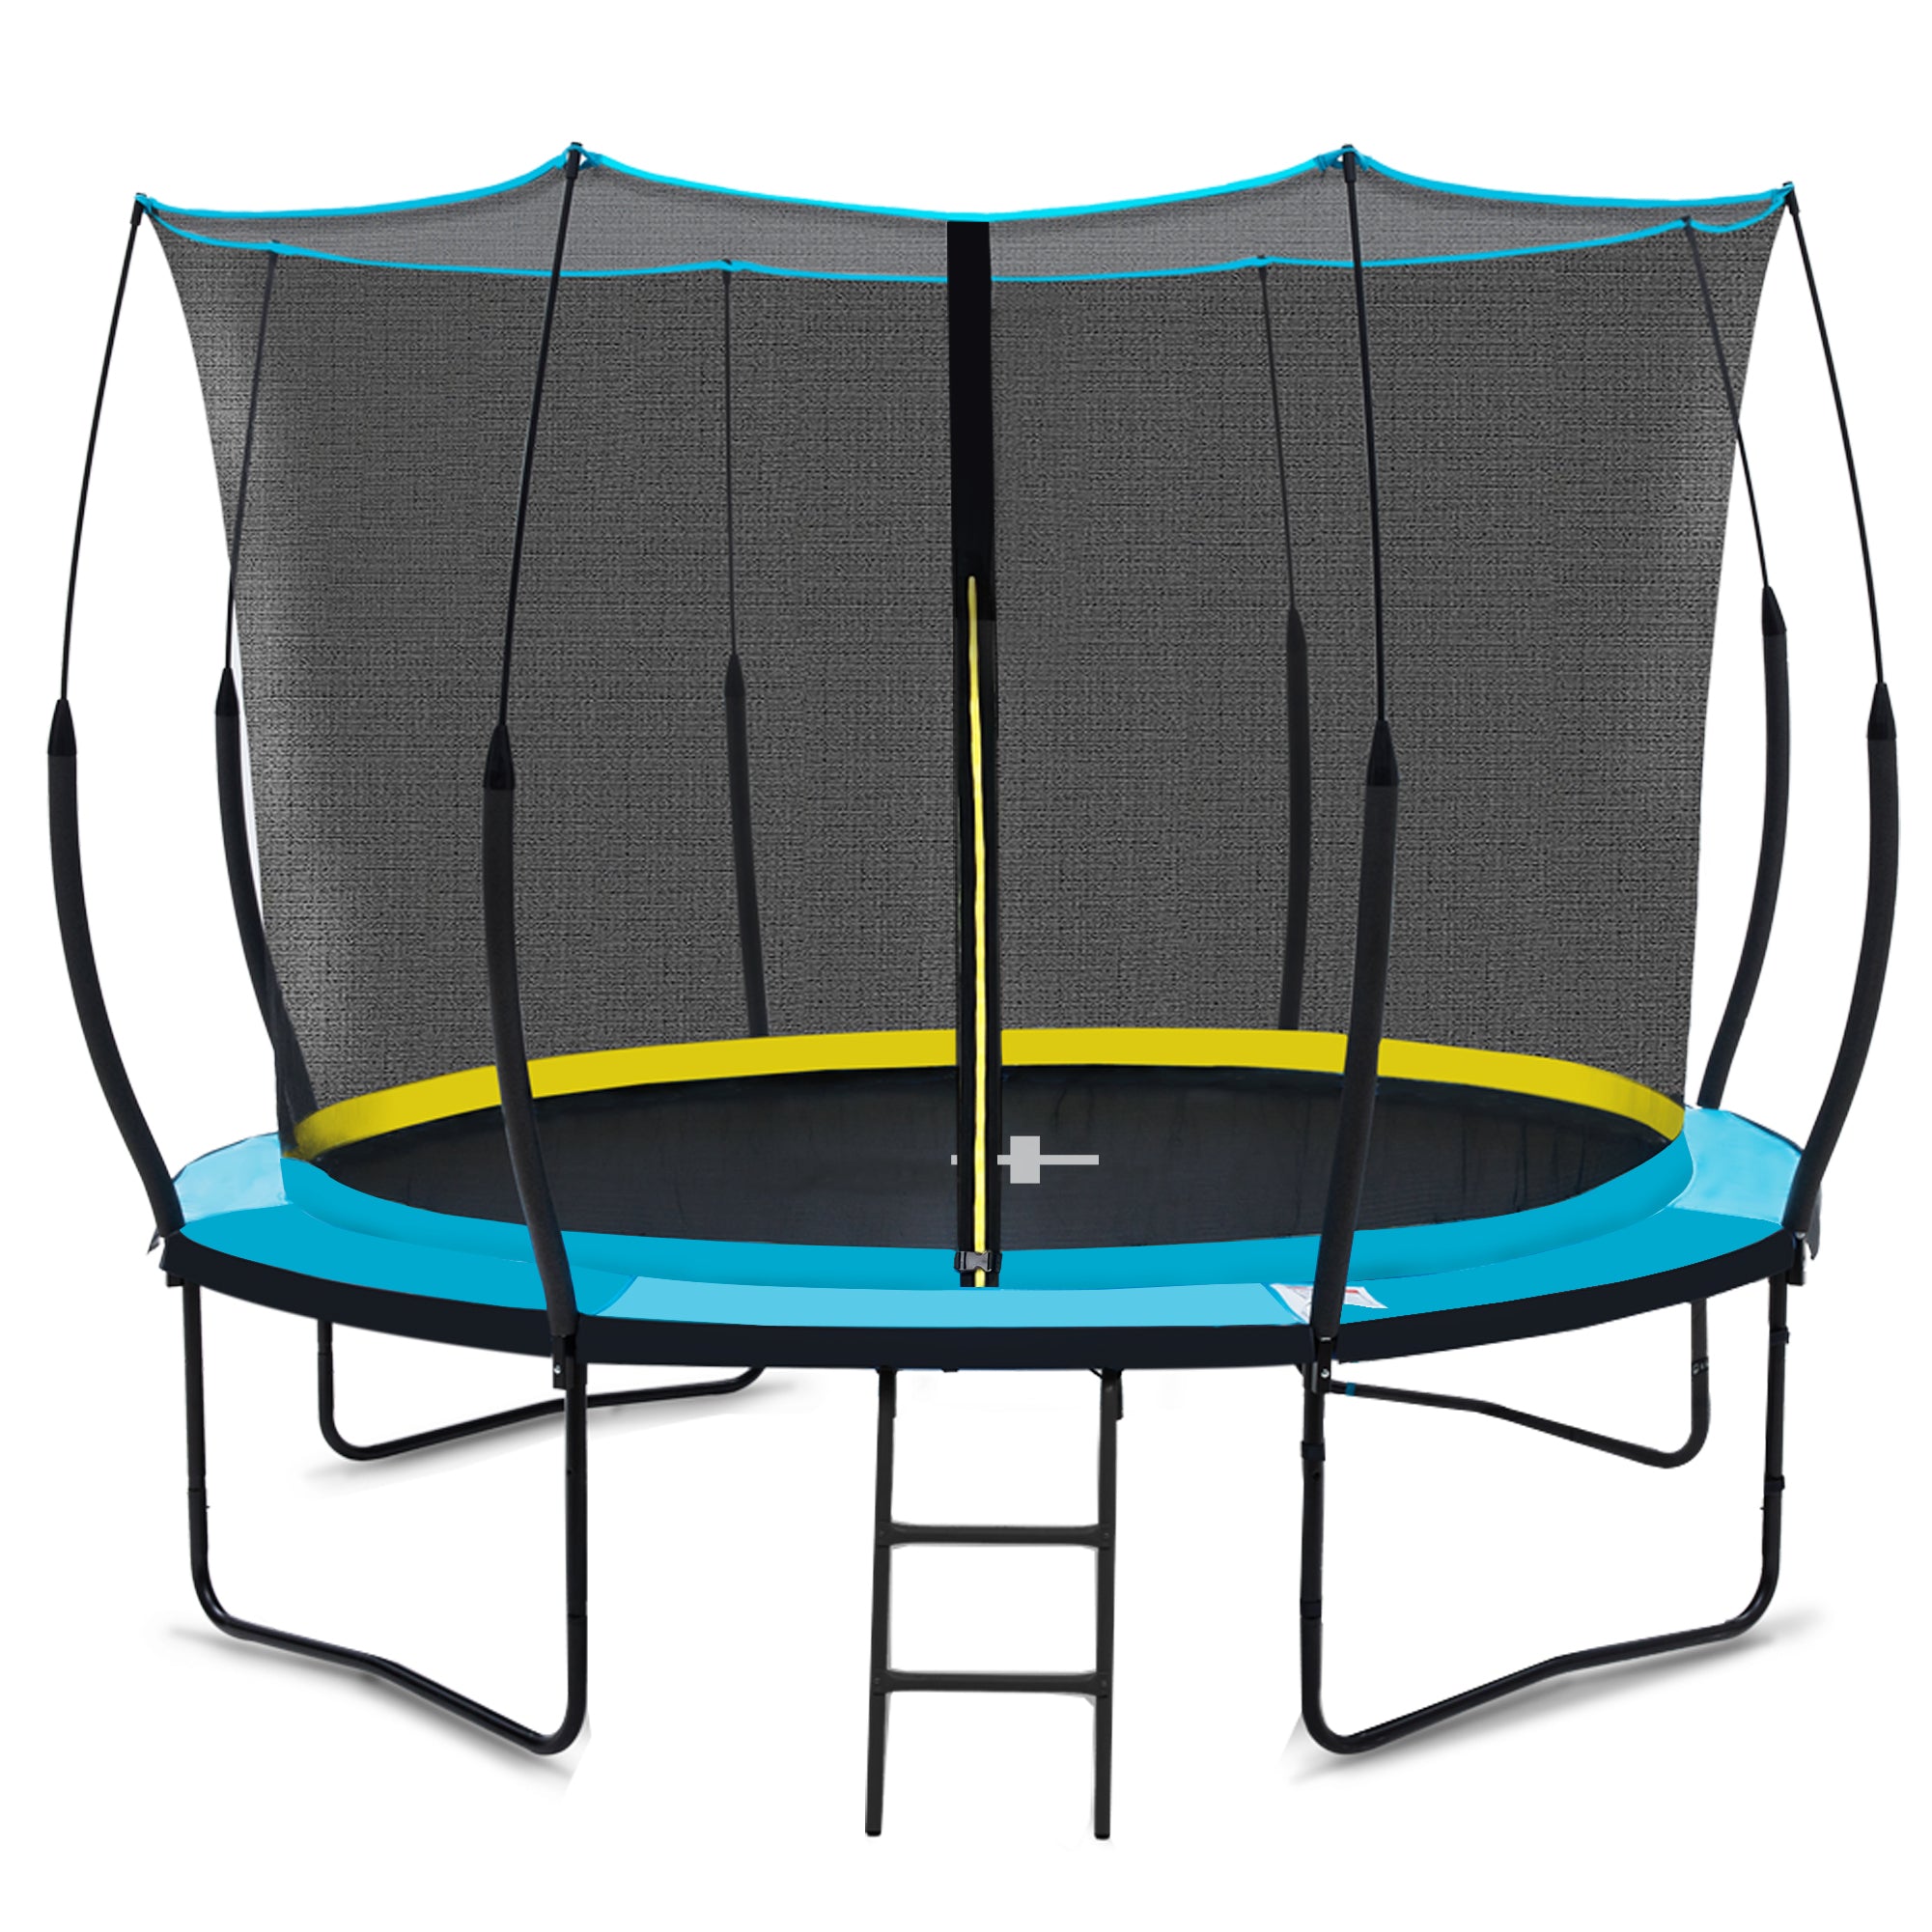 YC 12FT Recreational Trampolines with Enclosure for blue-steel